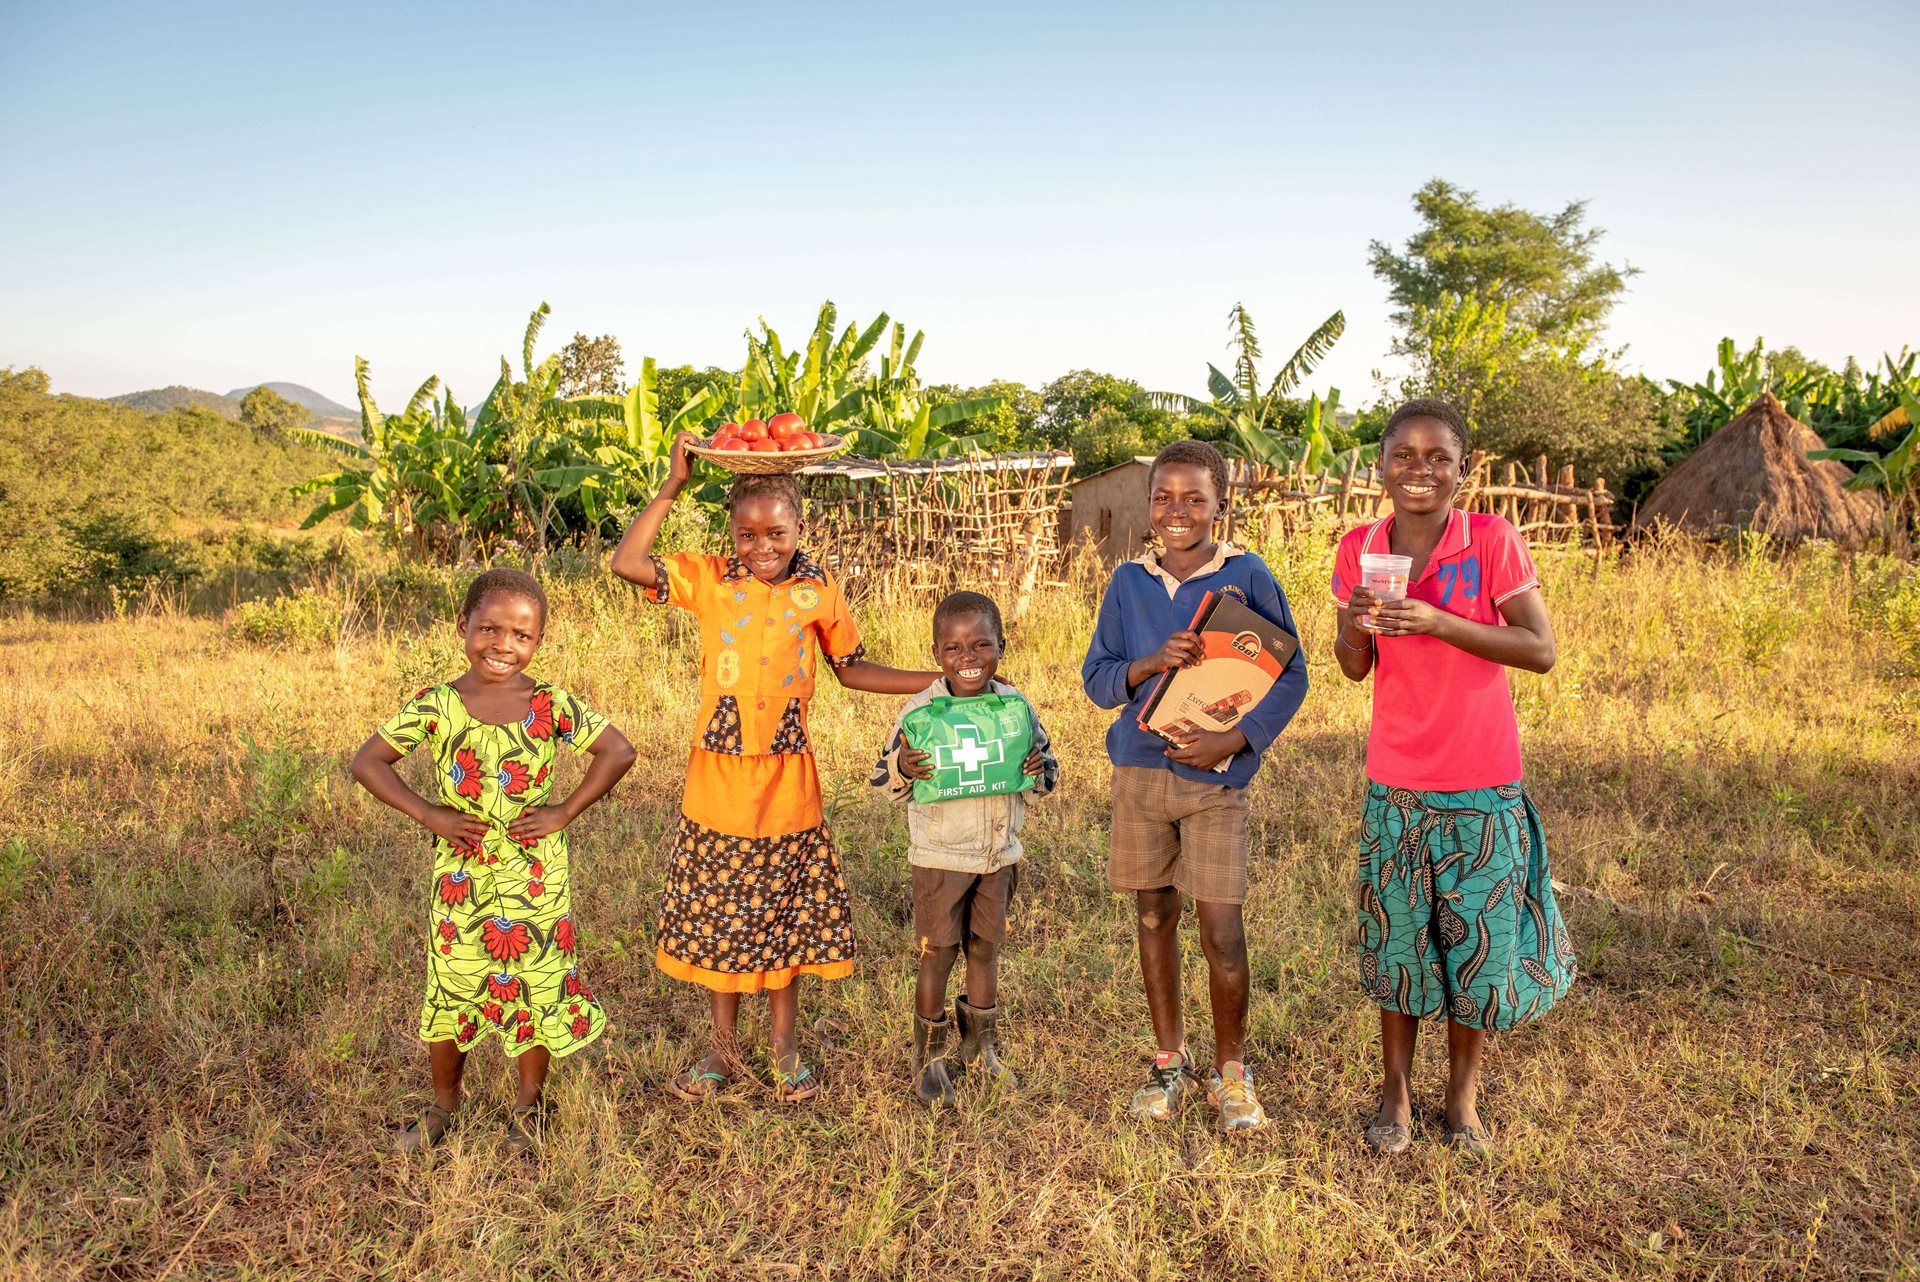 A group of children standing in a field holding essential items.